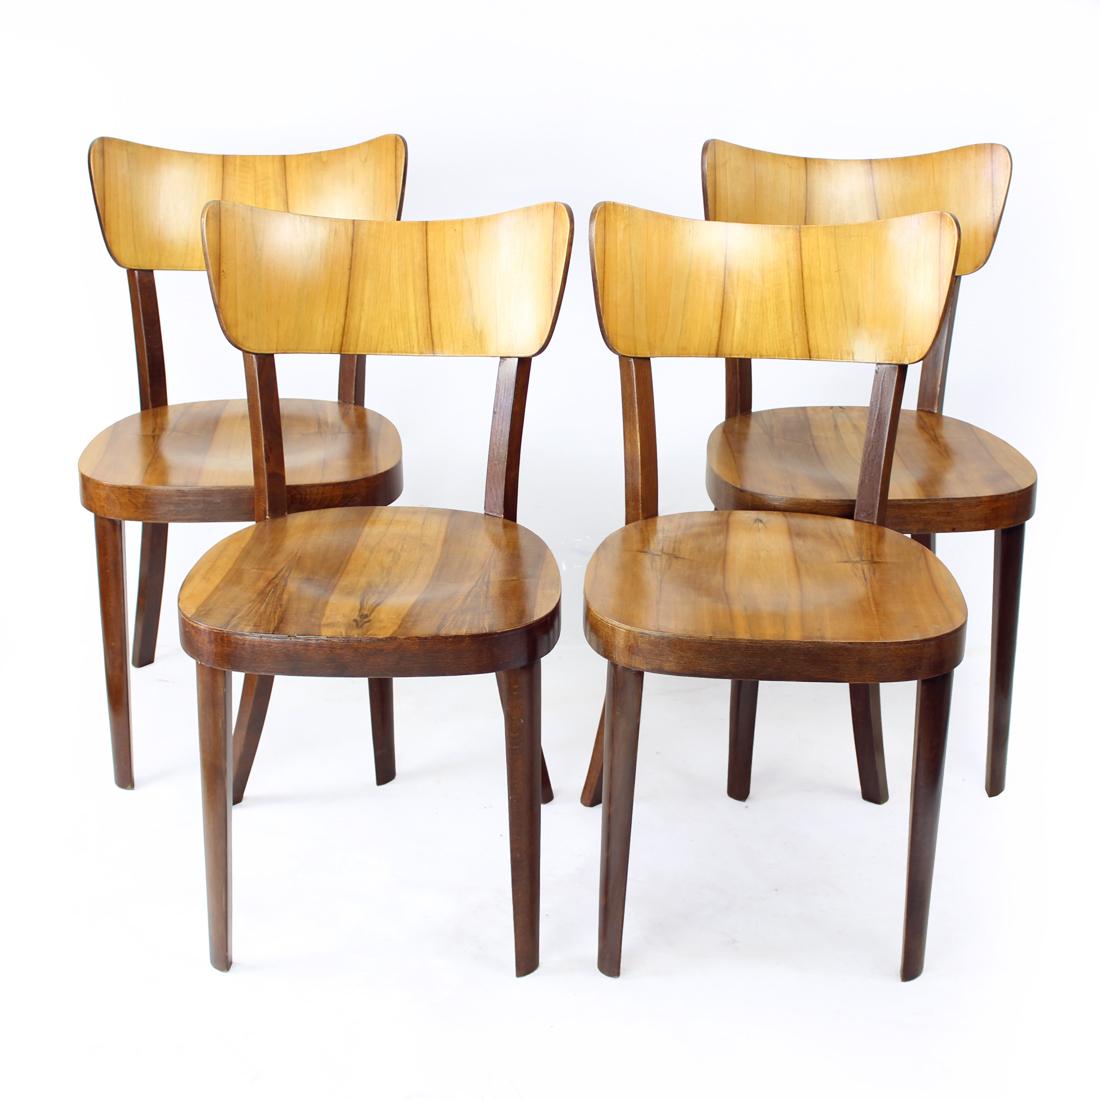 Set Of 4 Dining Chairs By Tatra In Walnut, Czechoslovakia 1950s In Good Condition For Sale In Zohor, SK